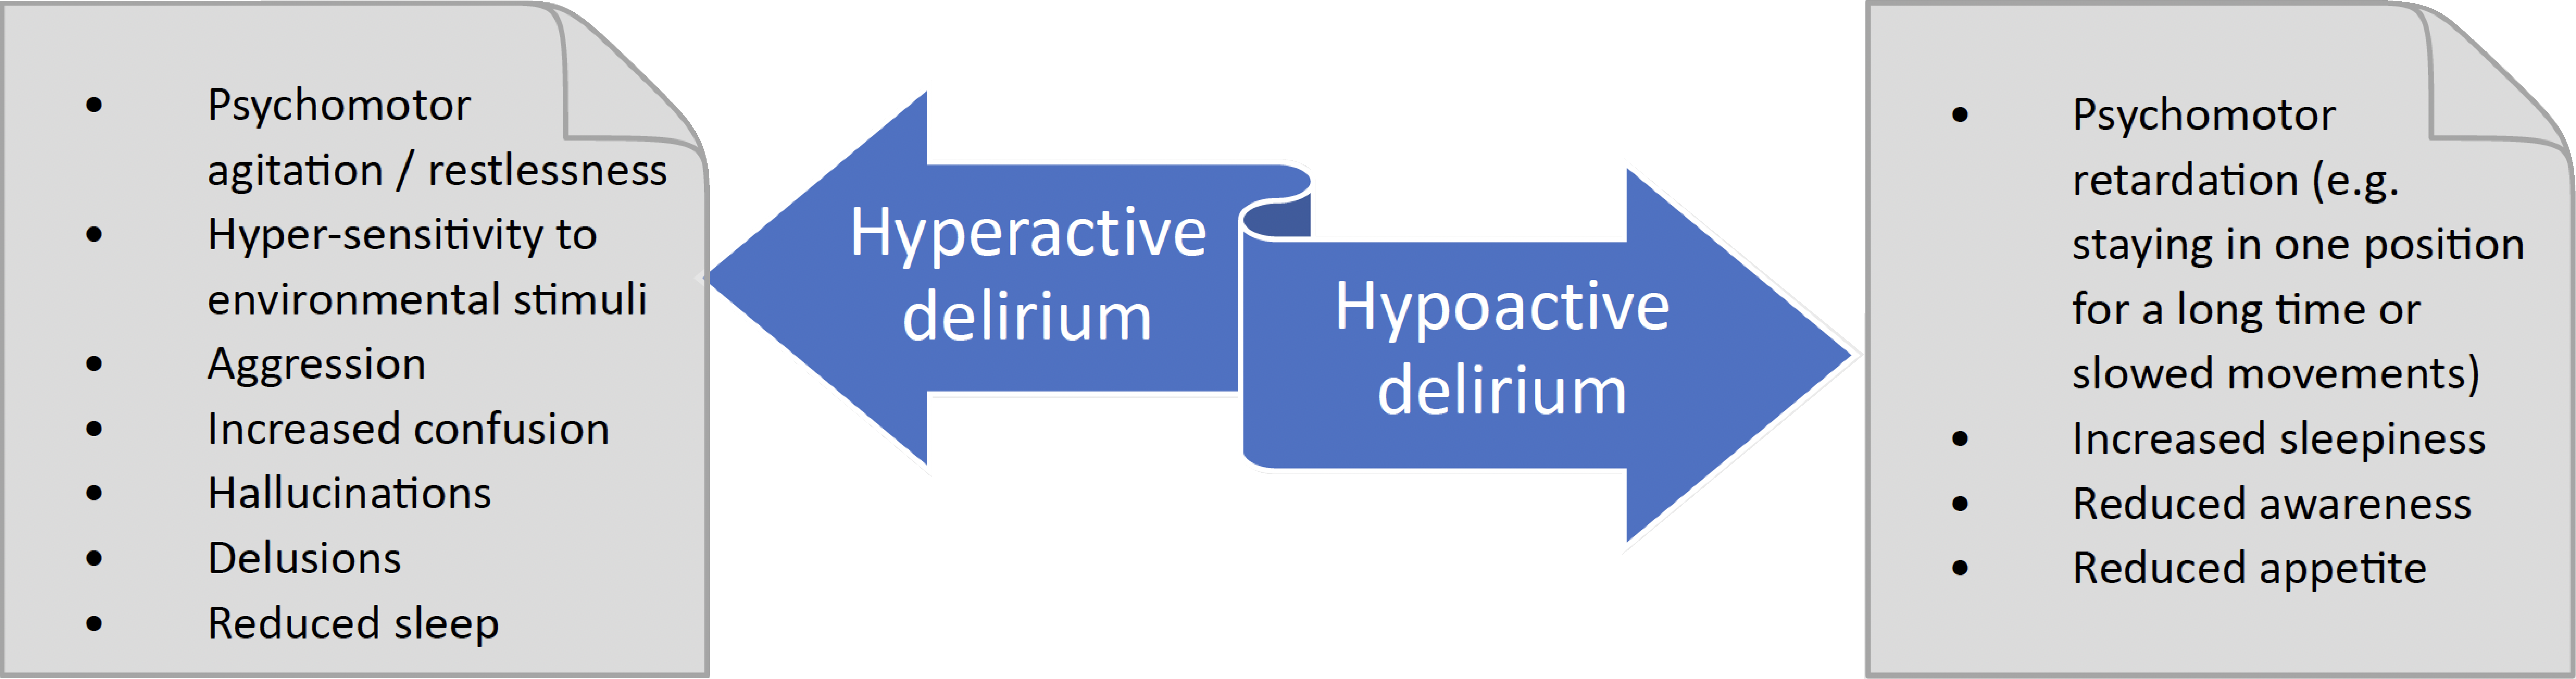 Subtypes of delirium table